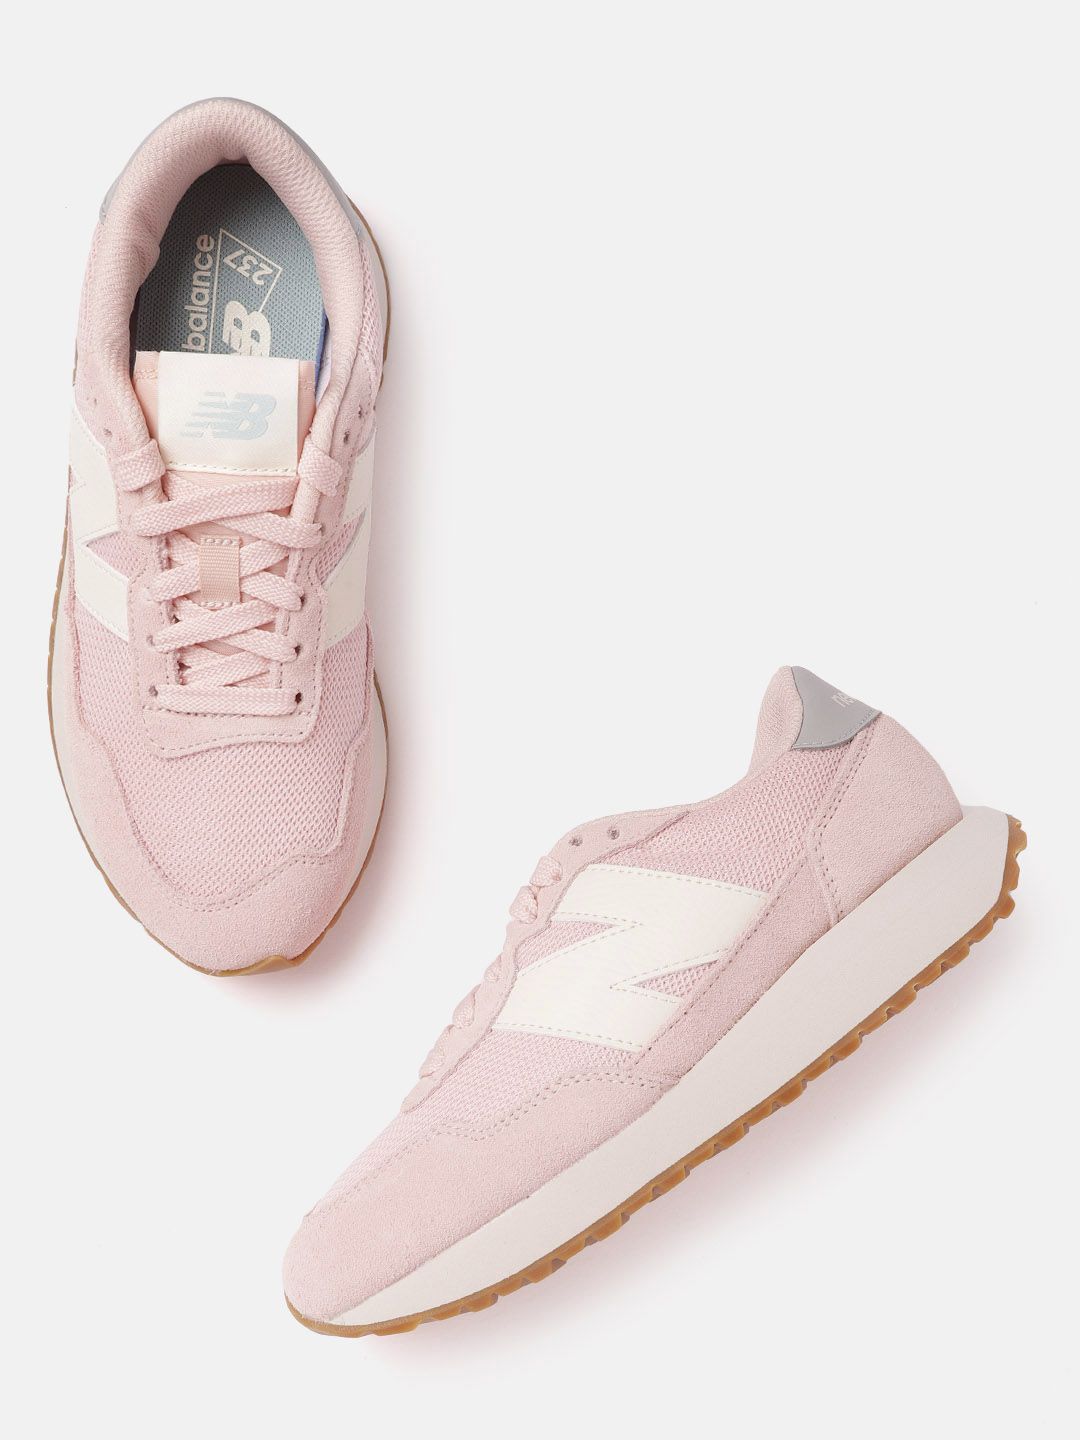 New Balance Women Pink Woven Design Suede Sneakers Excluding Trims Price in India